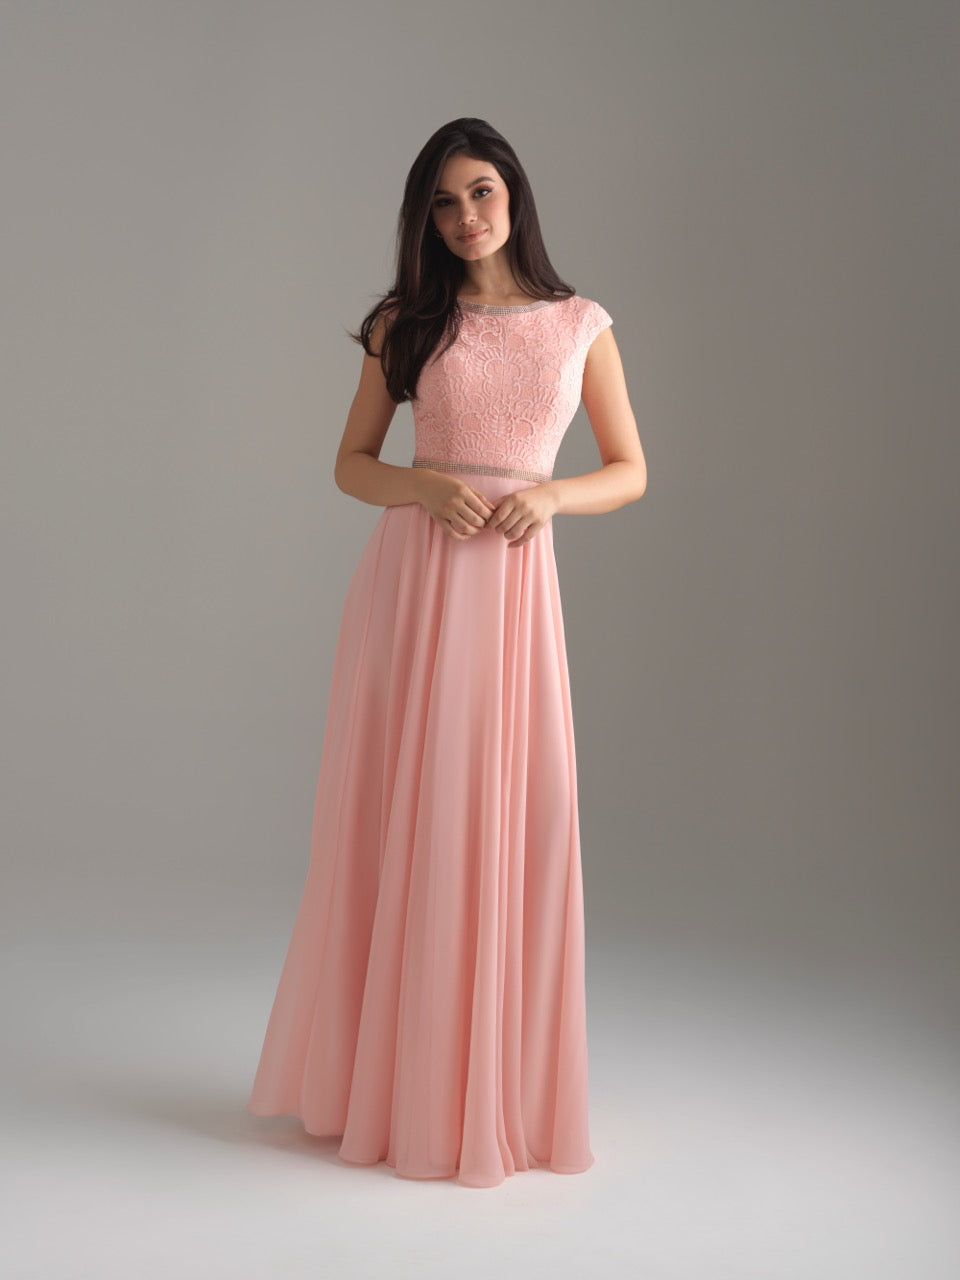 Madison James 18-802M pink modest prom dress A-Line winter formal cap sleeves cheap Mormon Prom conservative